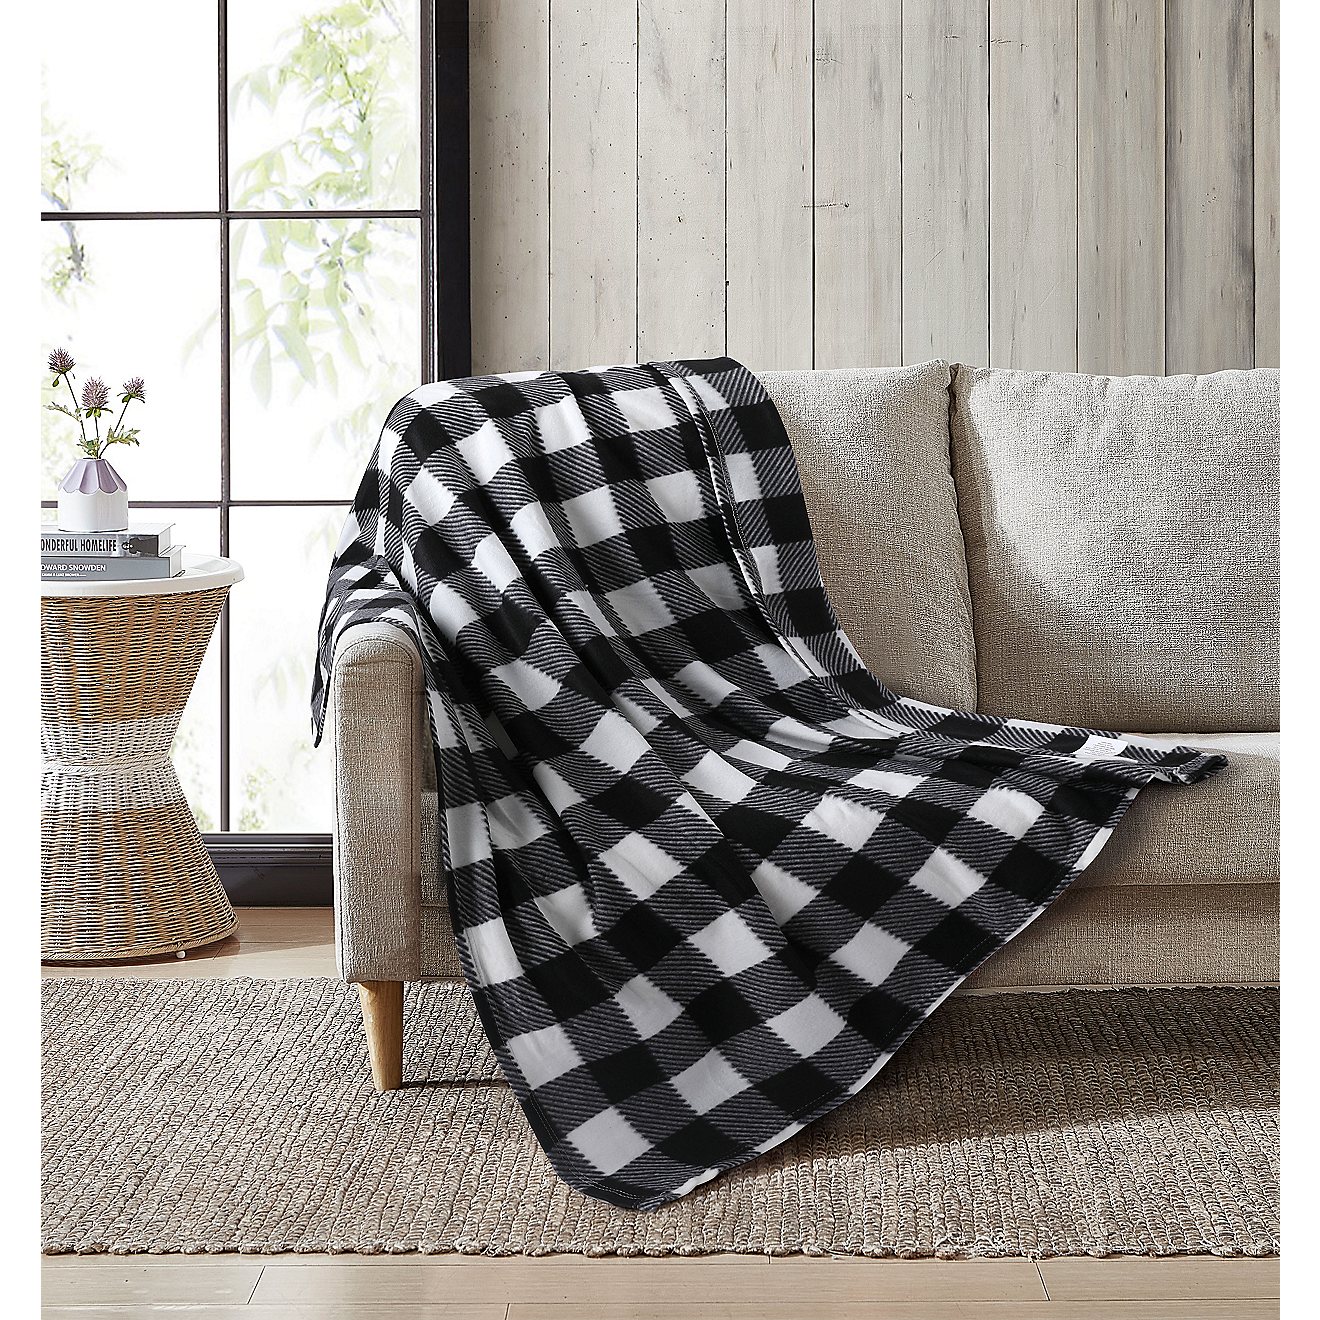 Snowcap 50 in x 60 in Black/White Fleece Buffalo Check Throw Blanket                                                             - view number 3